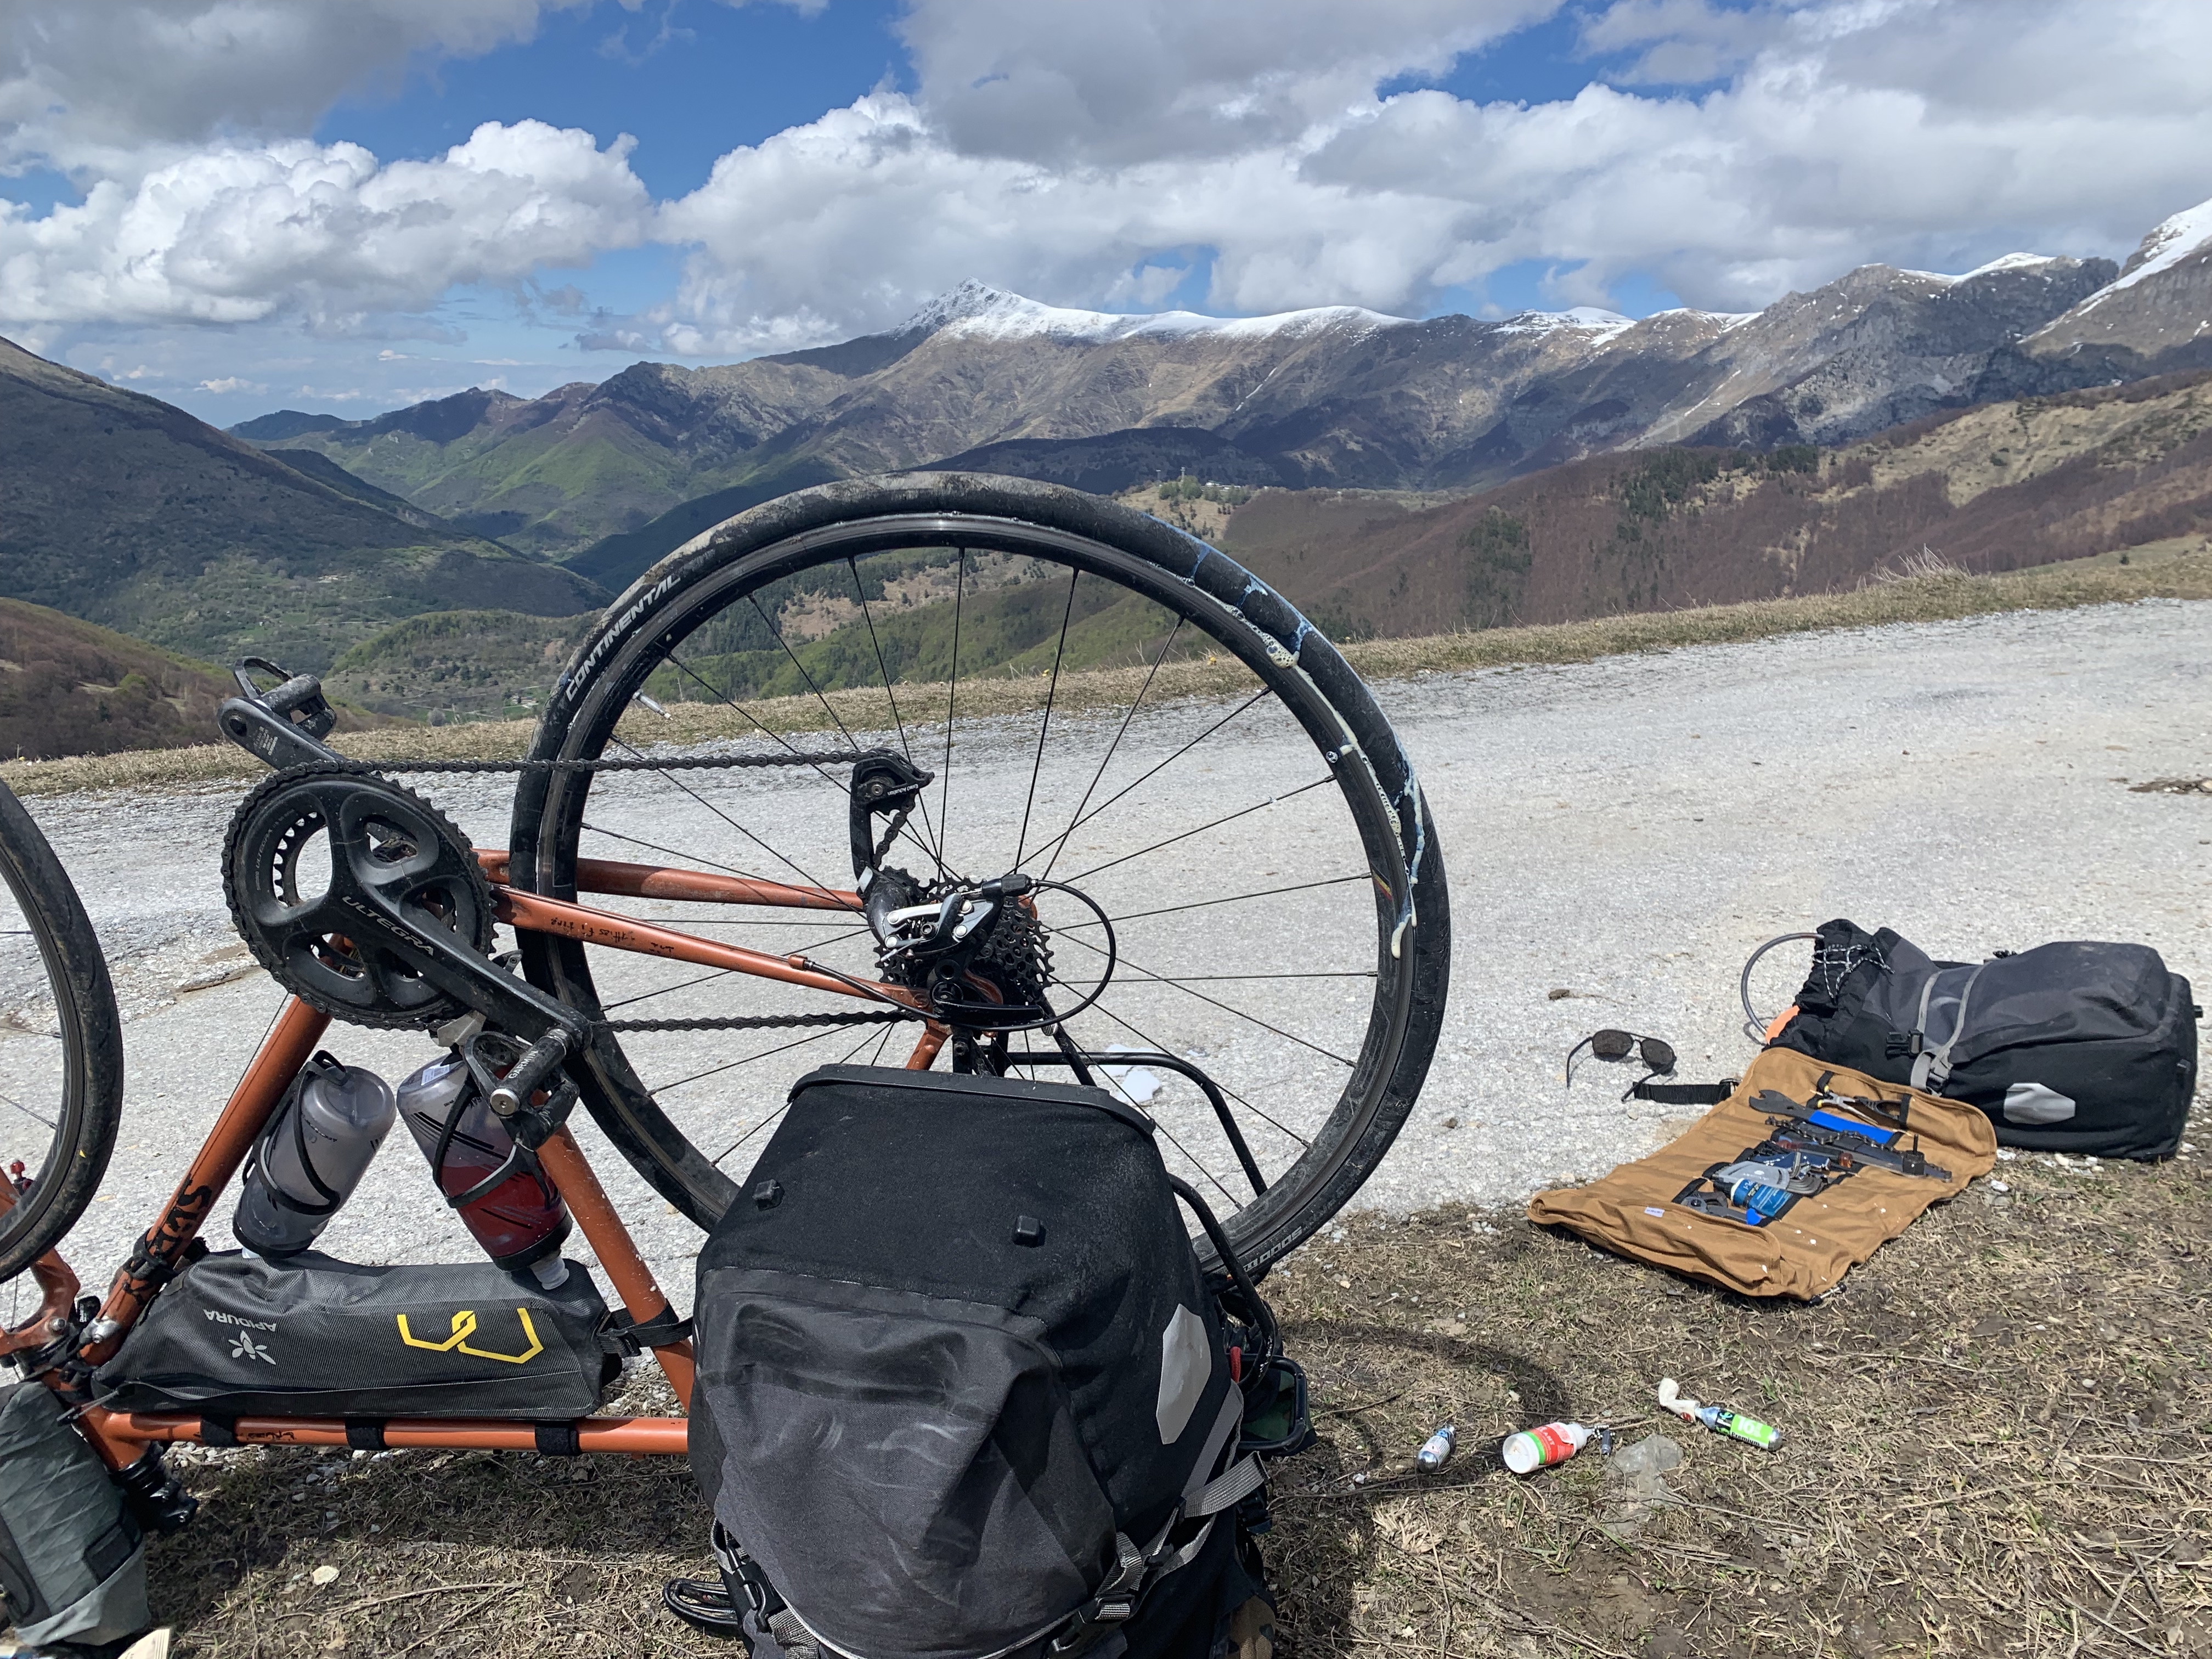 Dealing with tubeless tyre failure, replacing sealant and reseating a tyre, just after crossing from France to Italy still up in very nippy mountains.